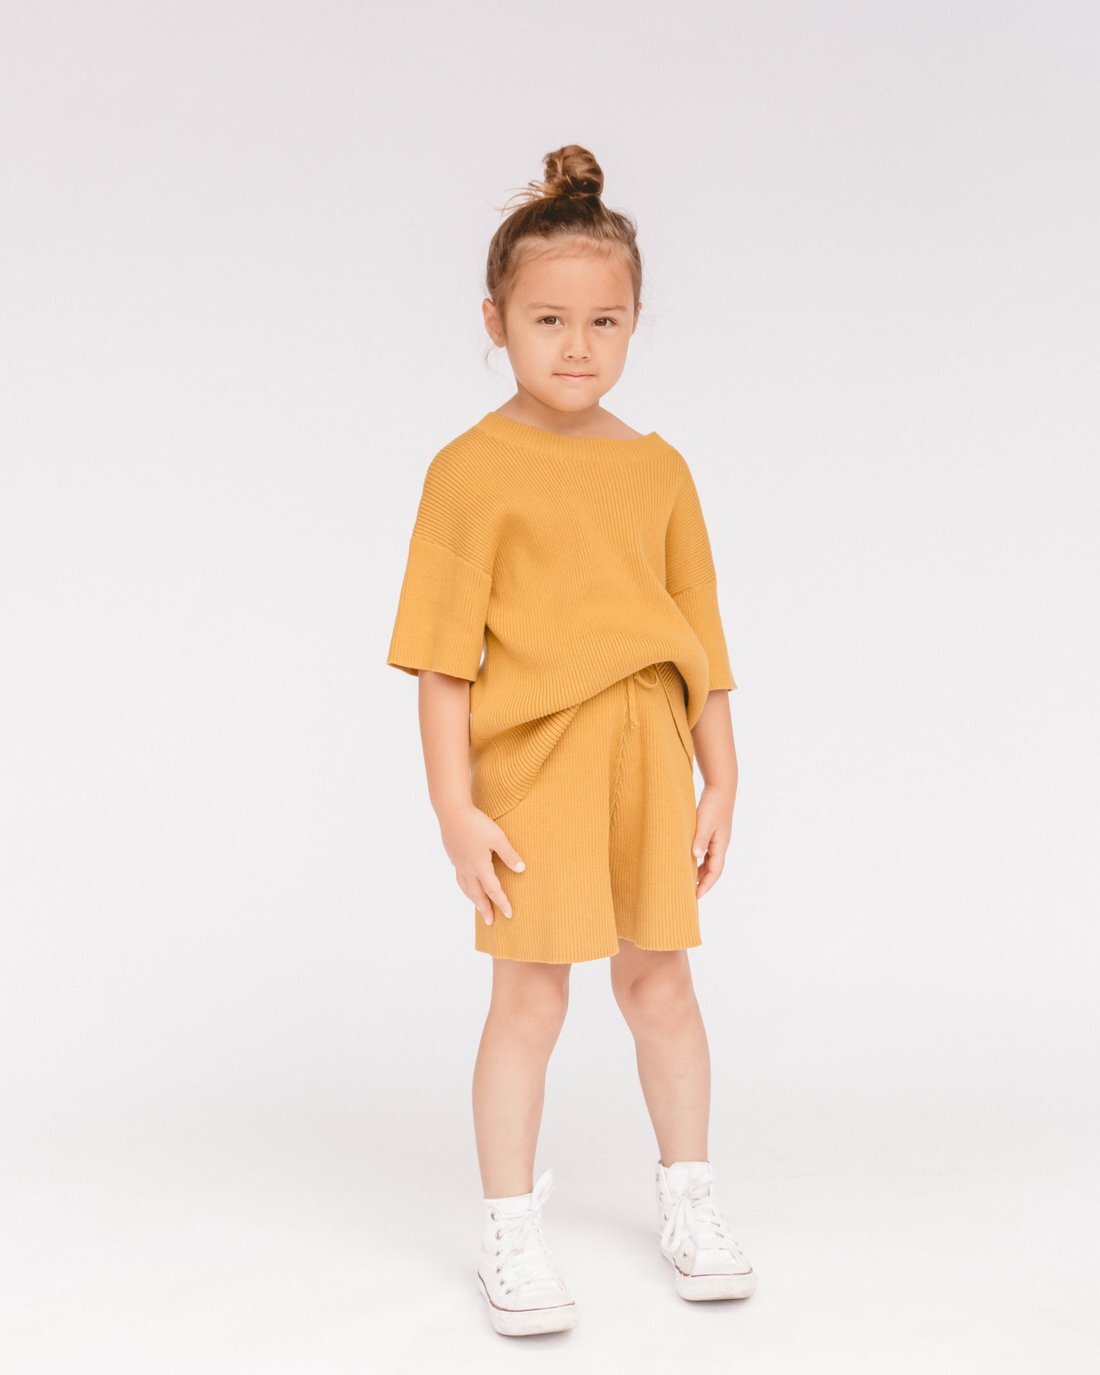 Buy The Lullaby Club Mini Summer Knit Set Online At Bambini NZ